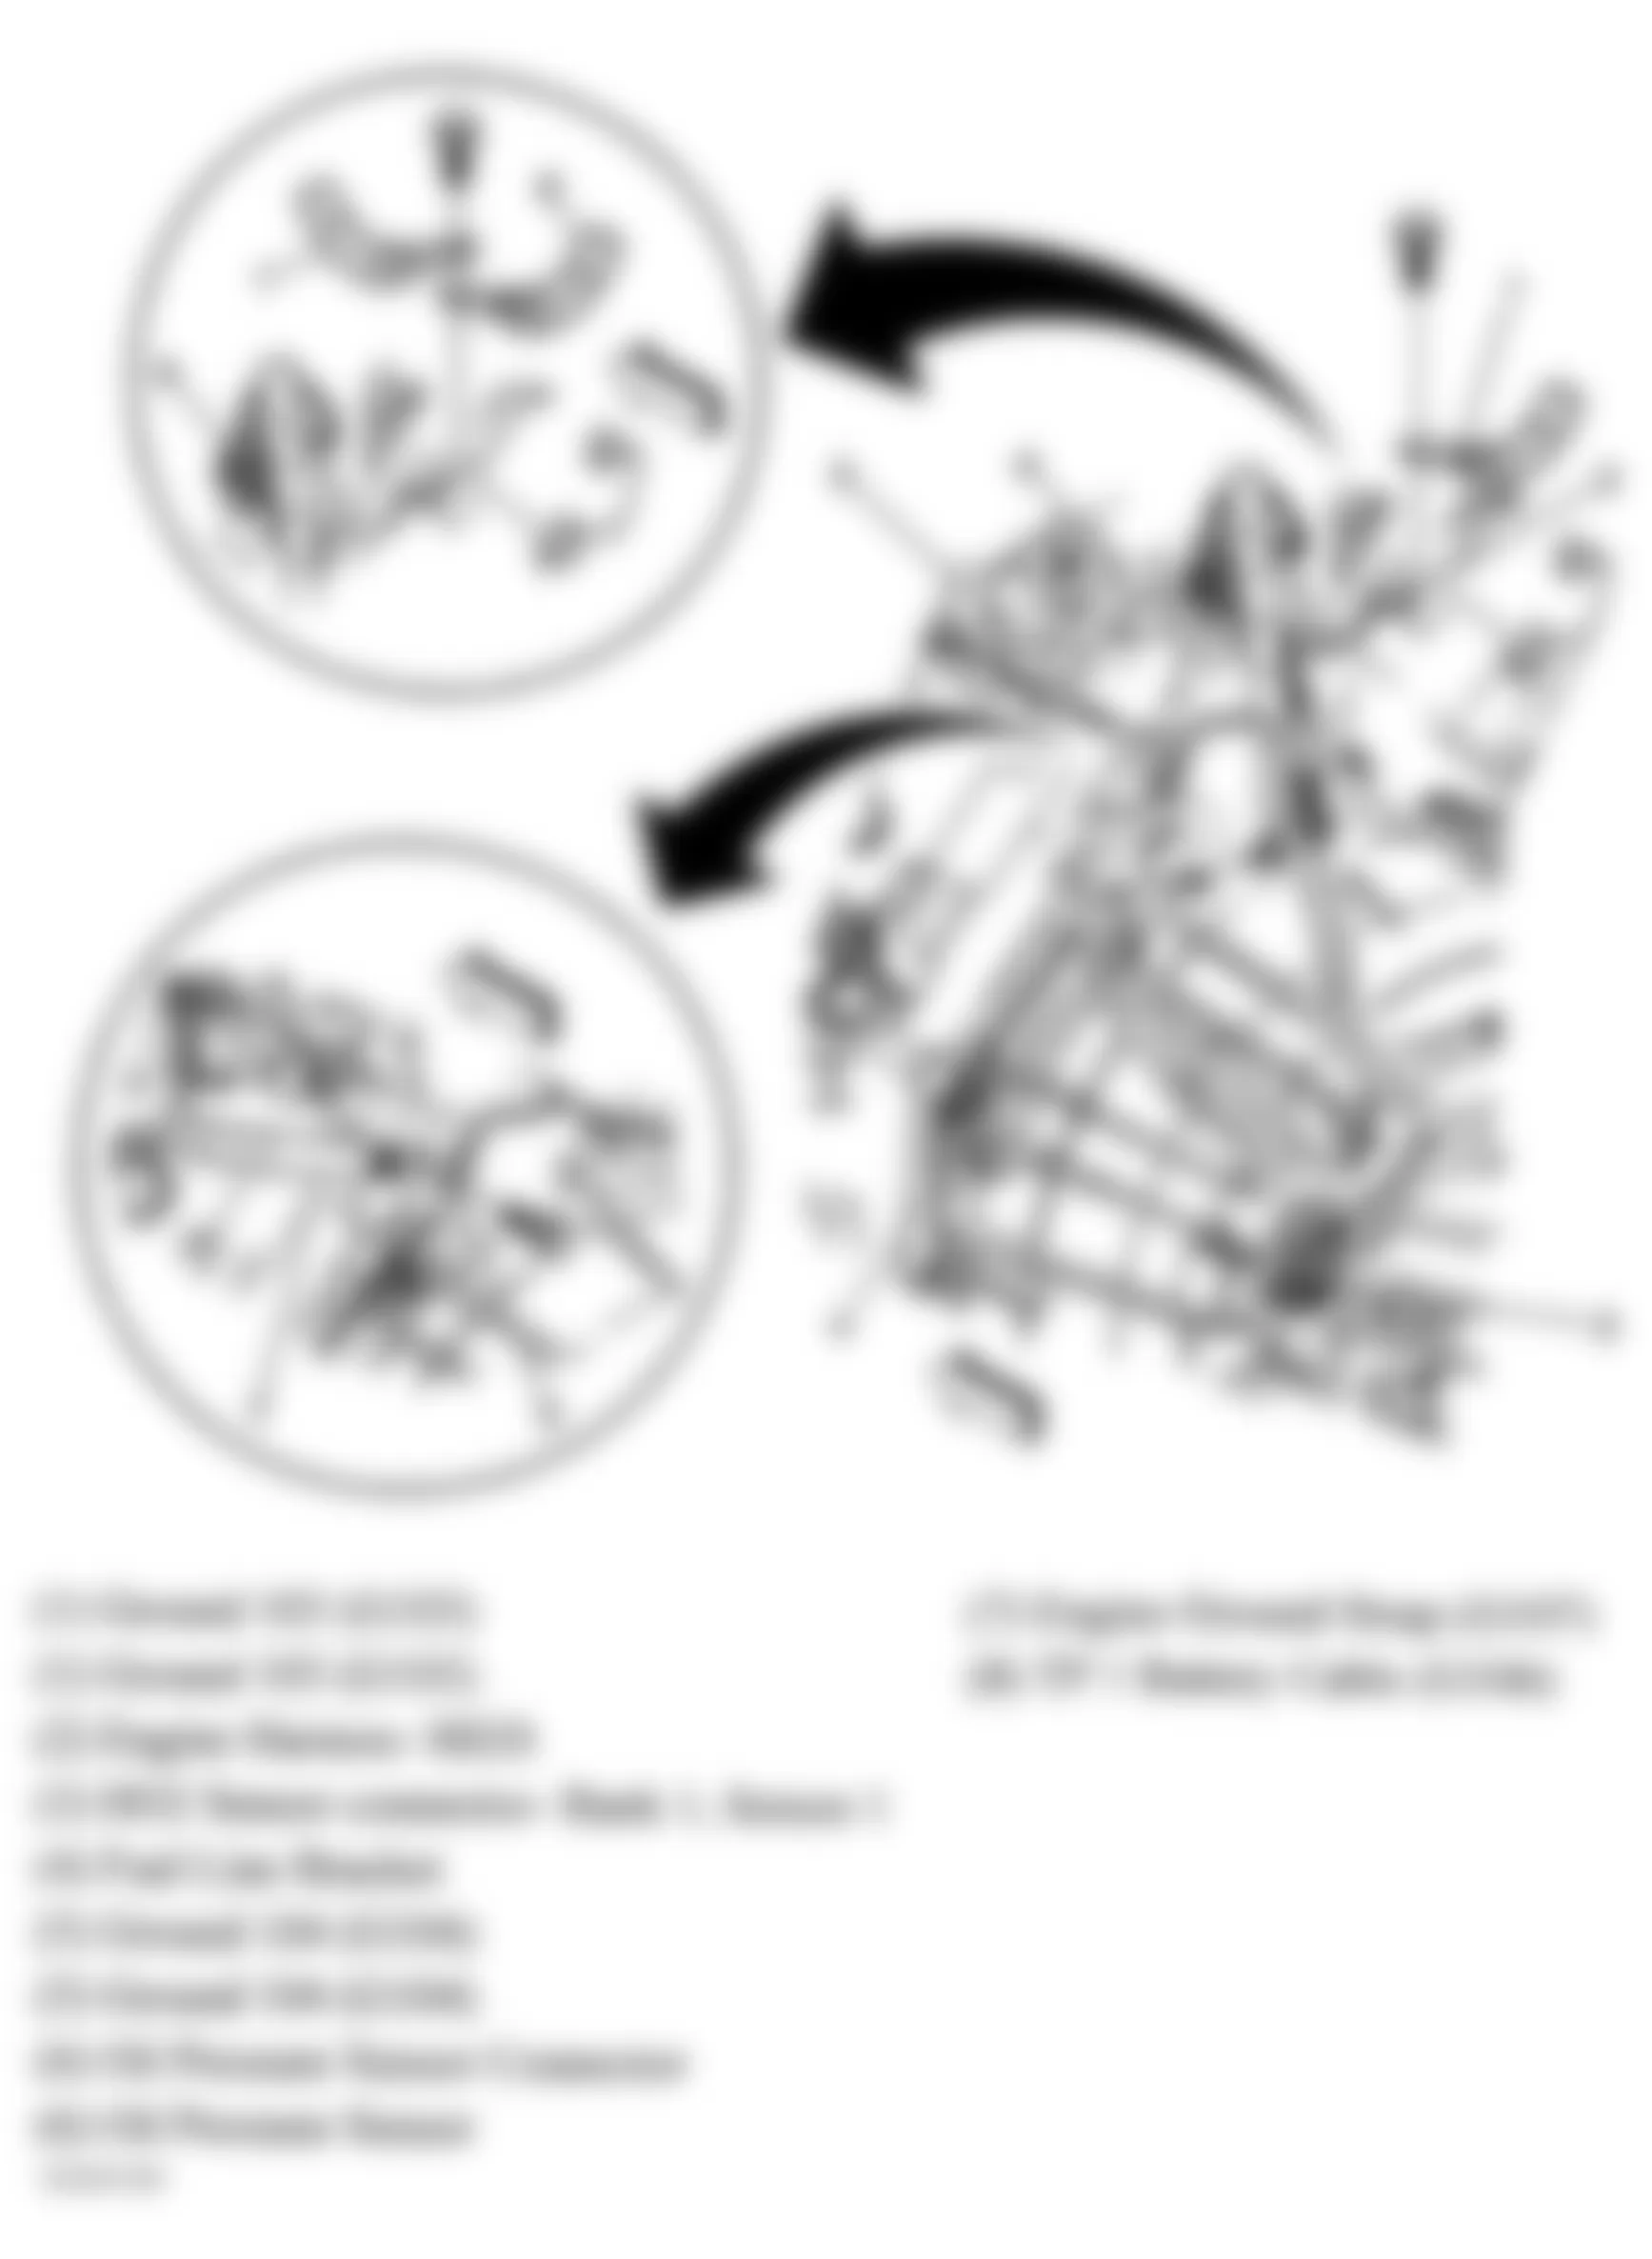 Chevrolet Avalanche 2500 2004 - Component Locations -  Rear Of Engine (4.8L, 5.3L & 6.0L)